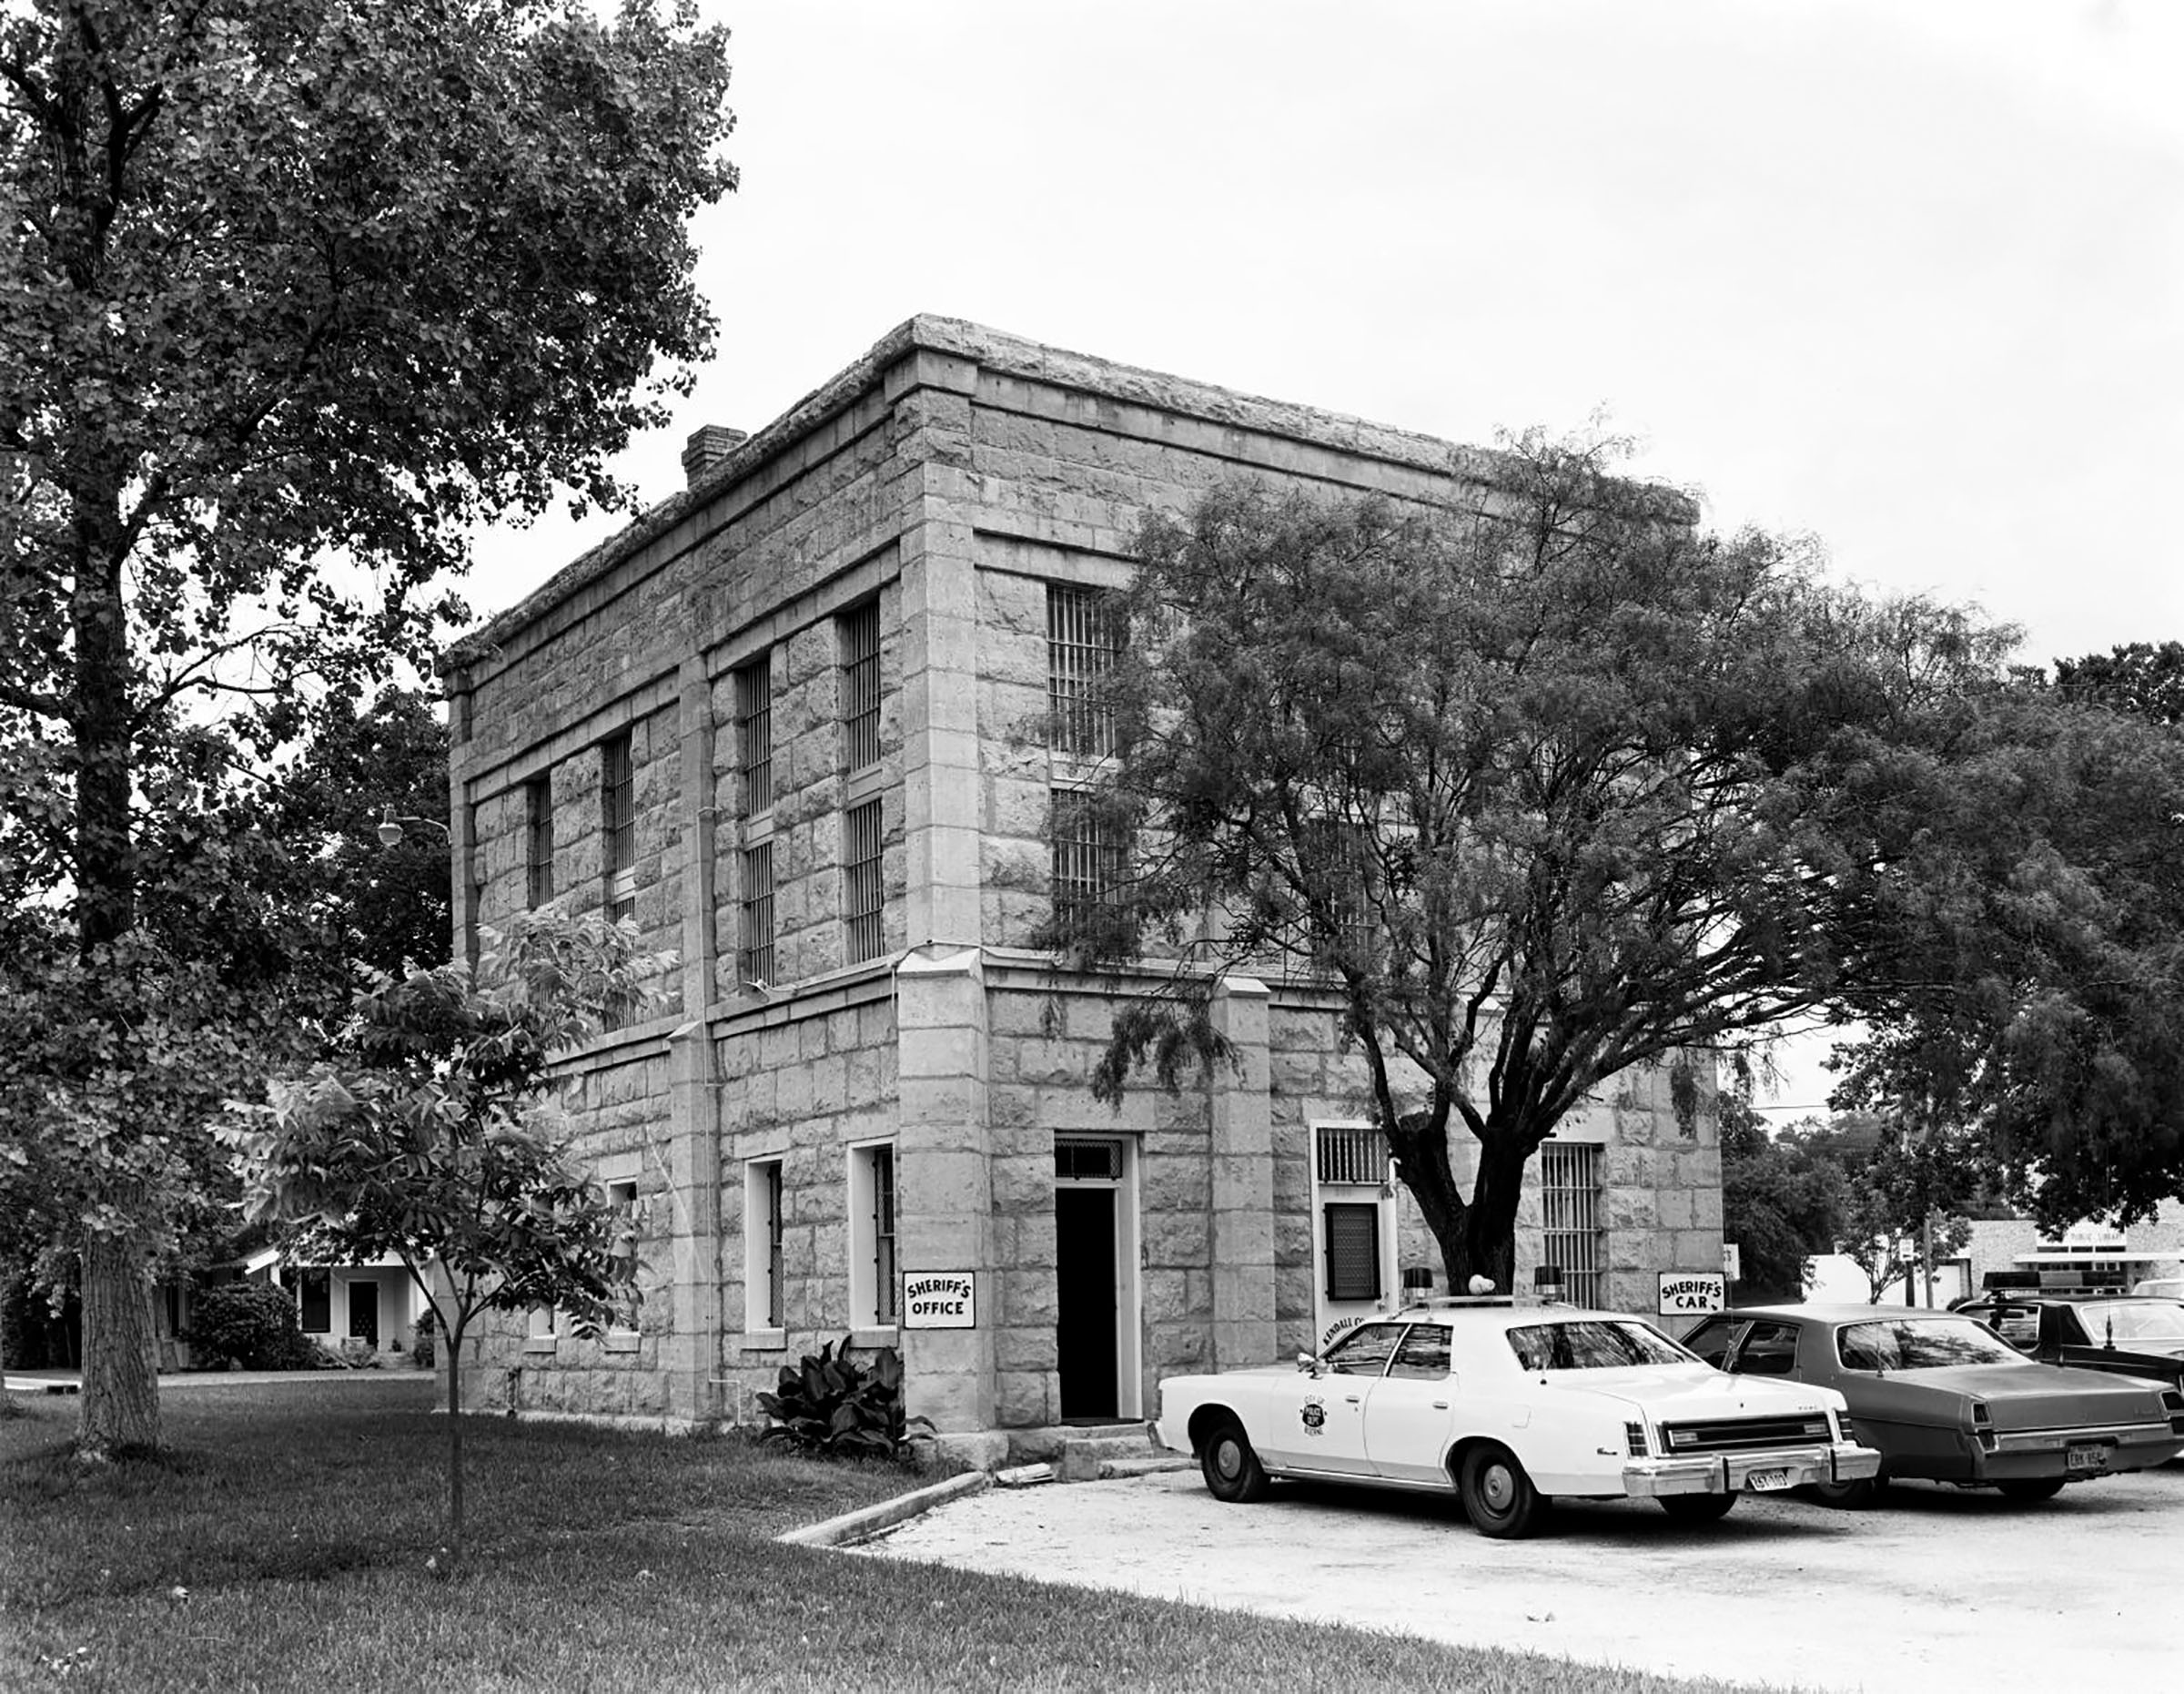 Vintage image of the Kendall County Jail.